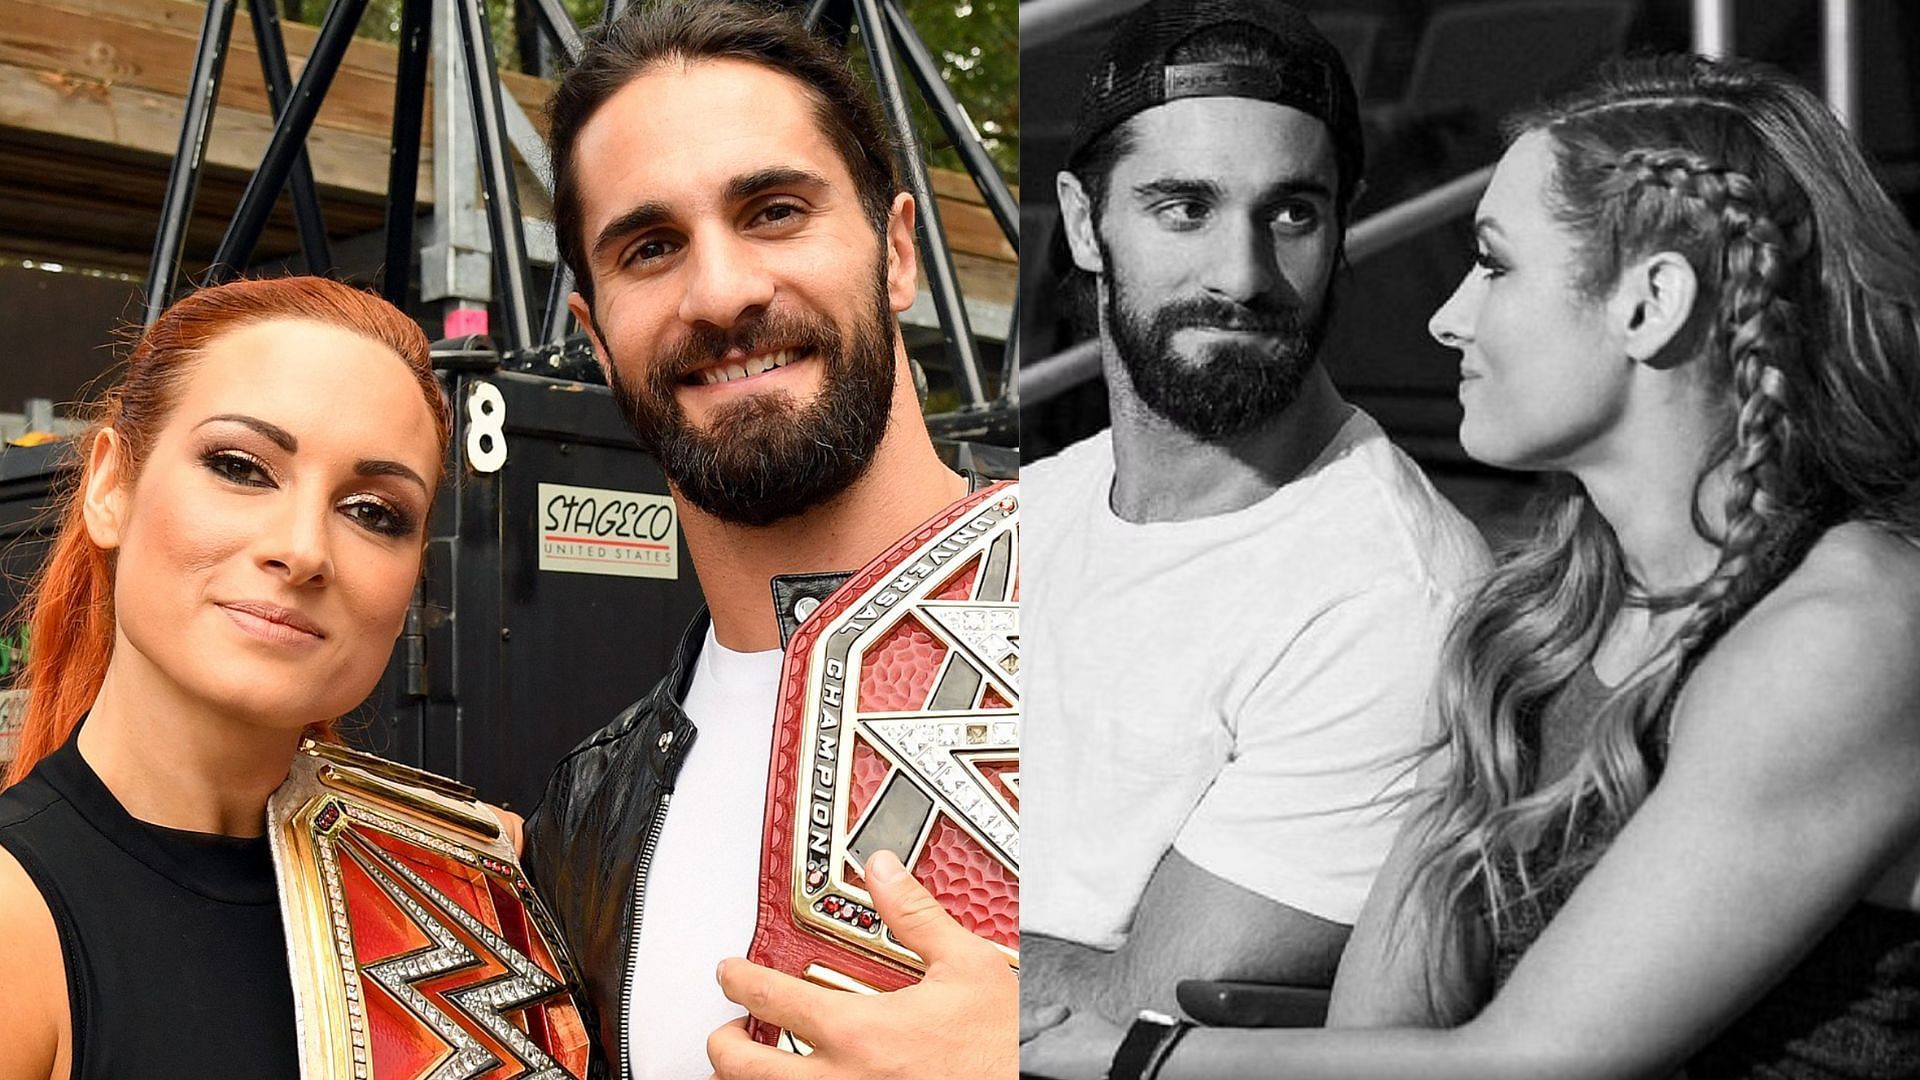 WWE Superstars Seth Rollins and Becky Lynch.